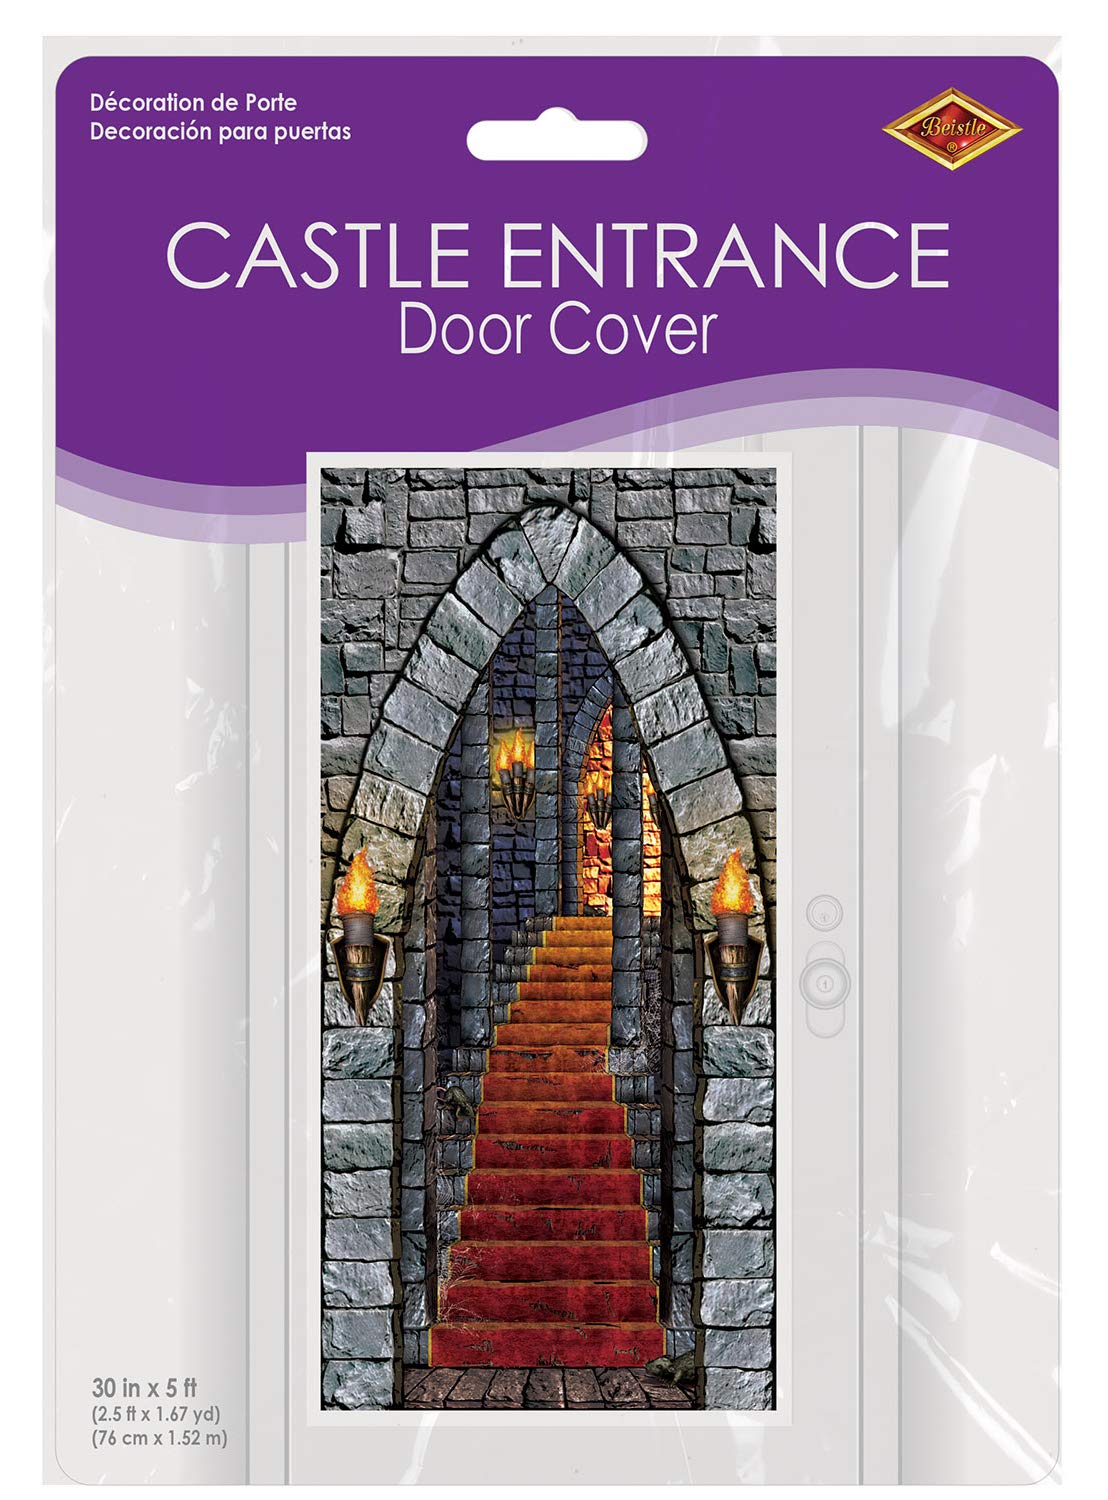 Beistle Indoor/Outdoor Plastic Castle Entrance Door Cover for Medieval Theme Decoration Halloween Party Supplies, 30